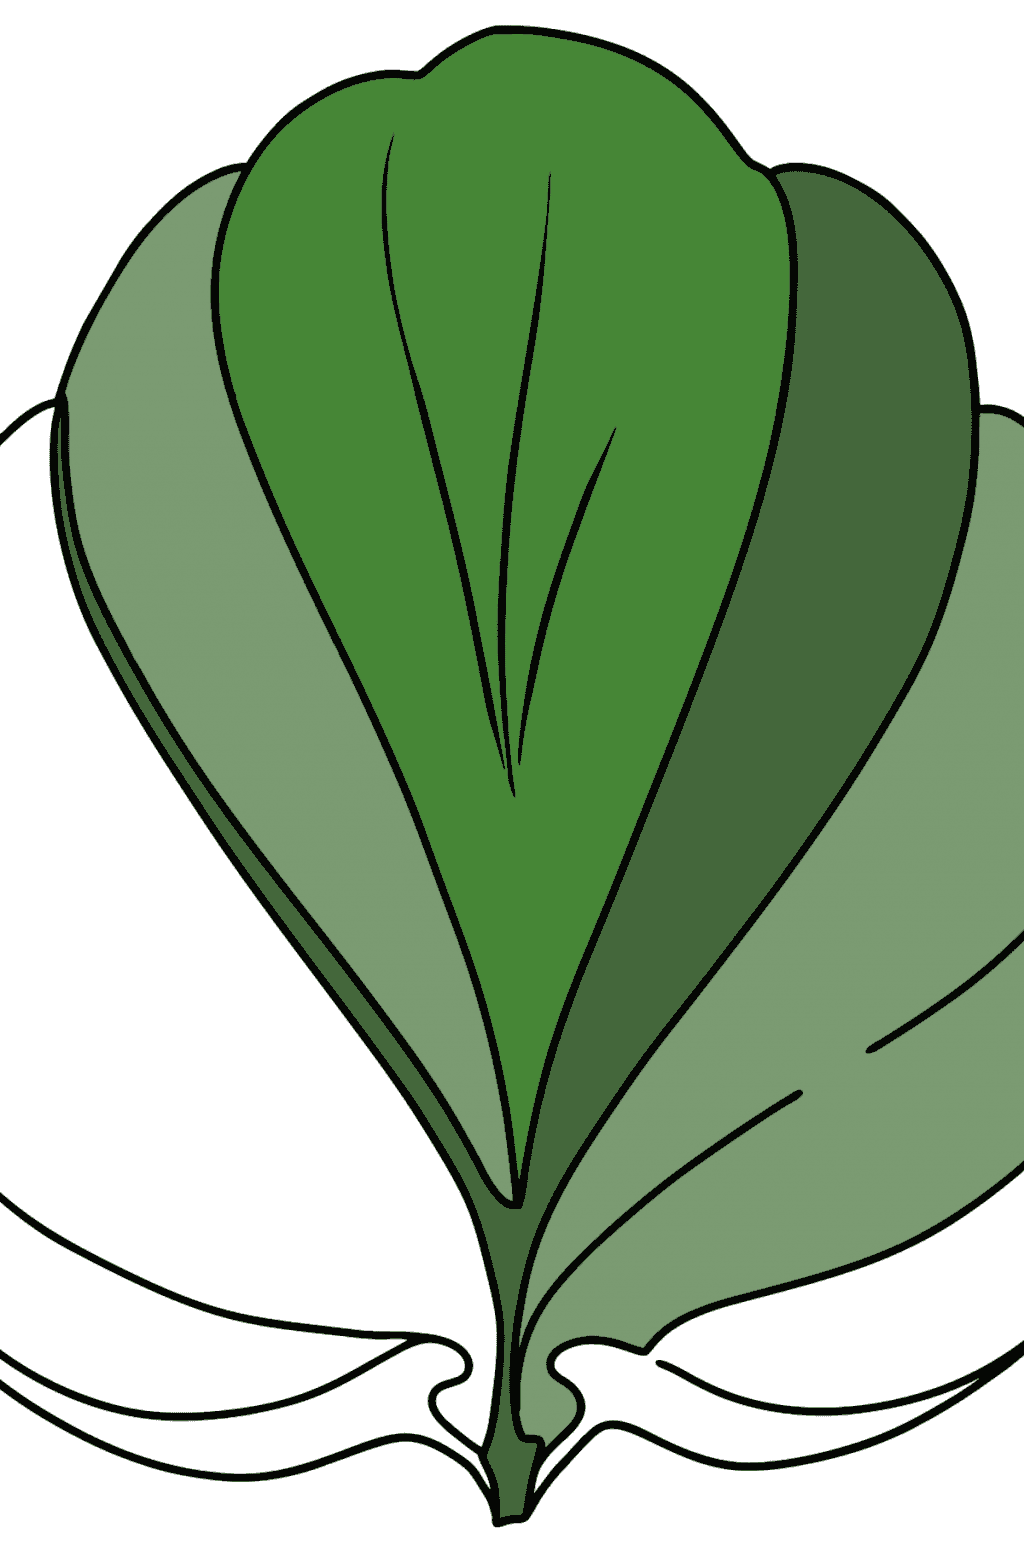 apple-tree-coloring-page-online-and-print-for-free